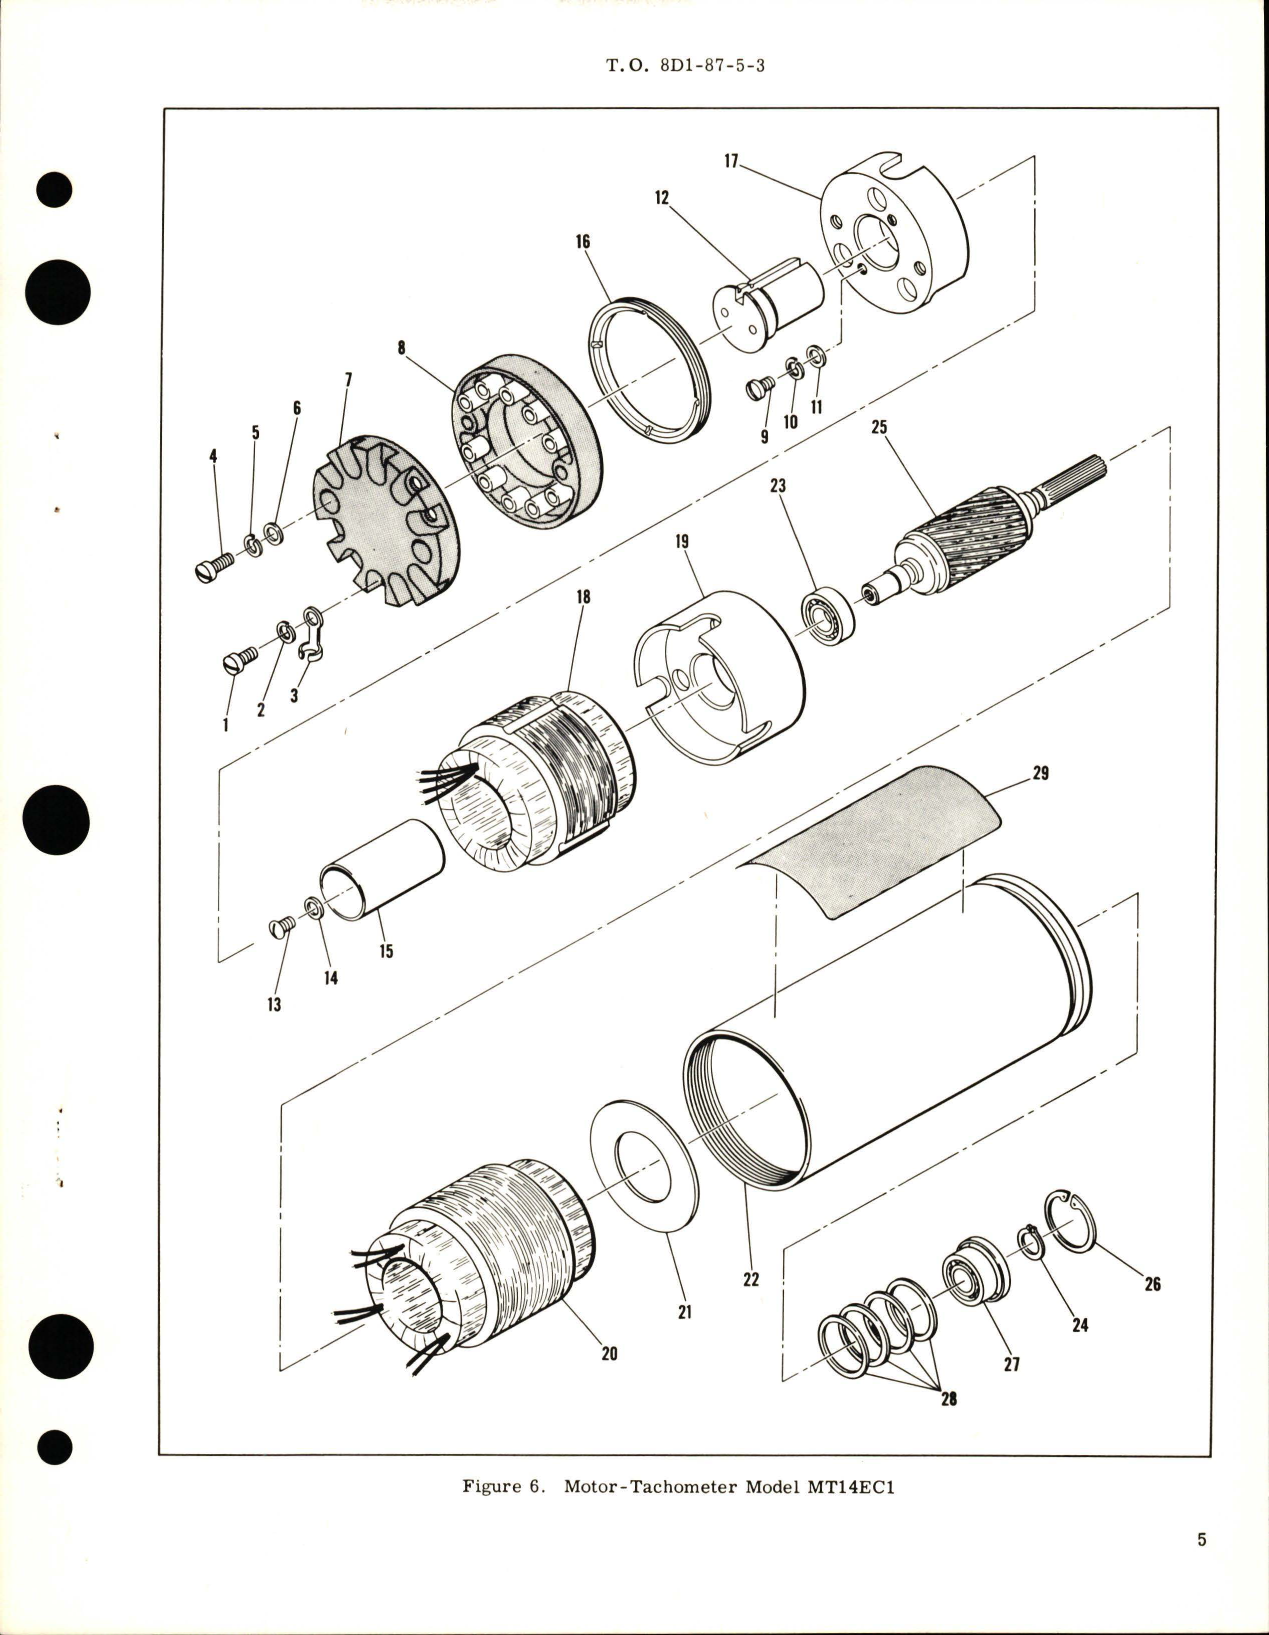 Sample page 5 from AirCorps Library document: Overhaul with Parts Breakdown for Motor-Tachometer - Model MT14EC1 